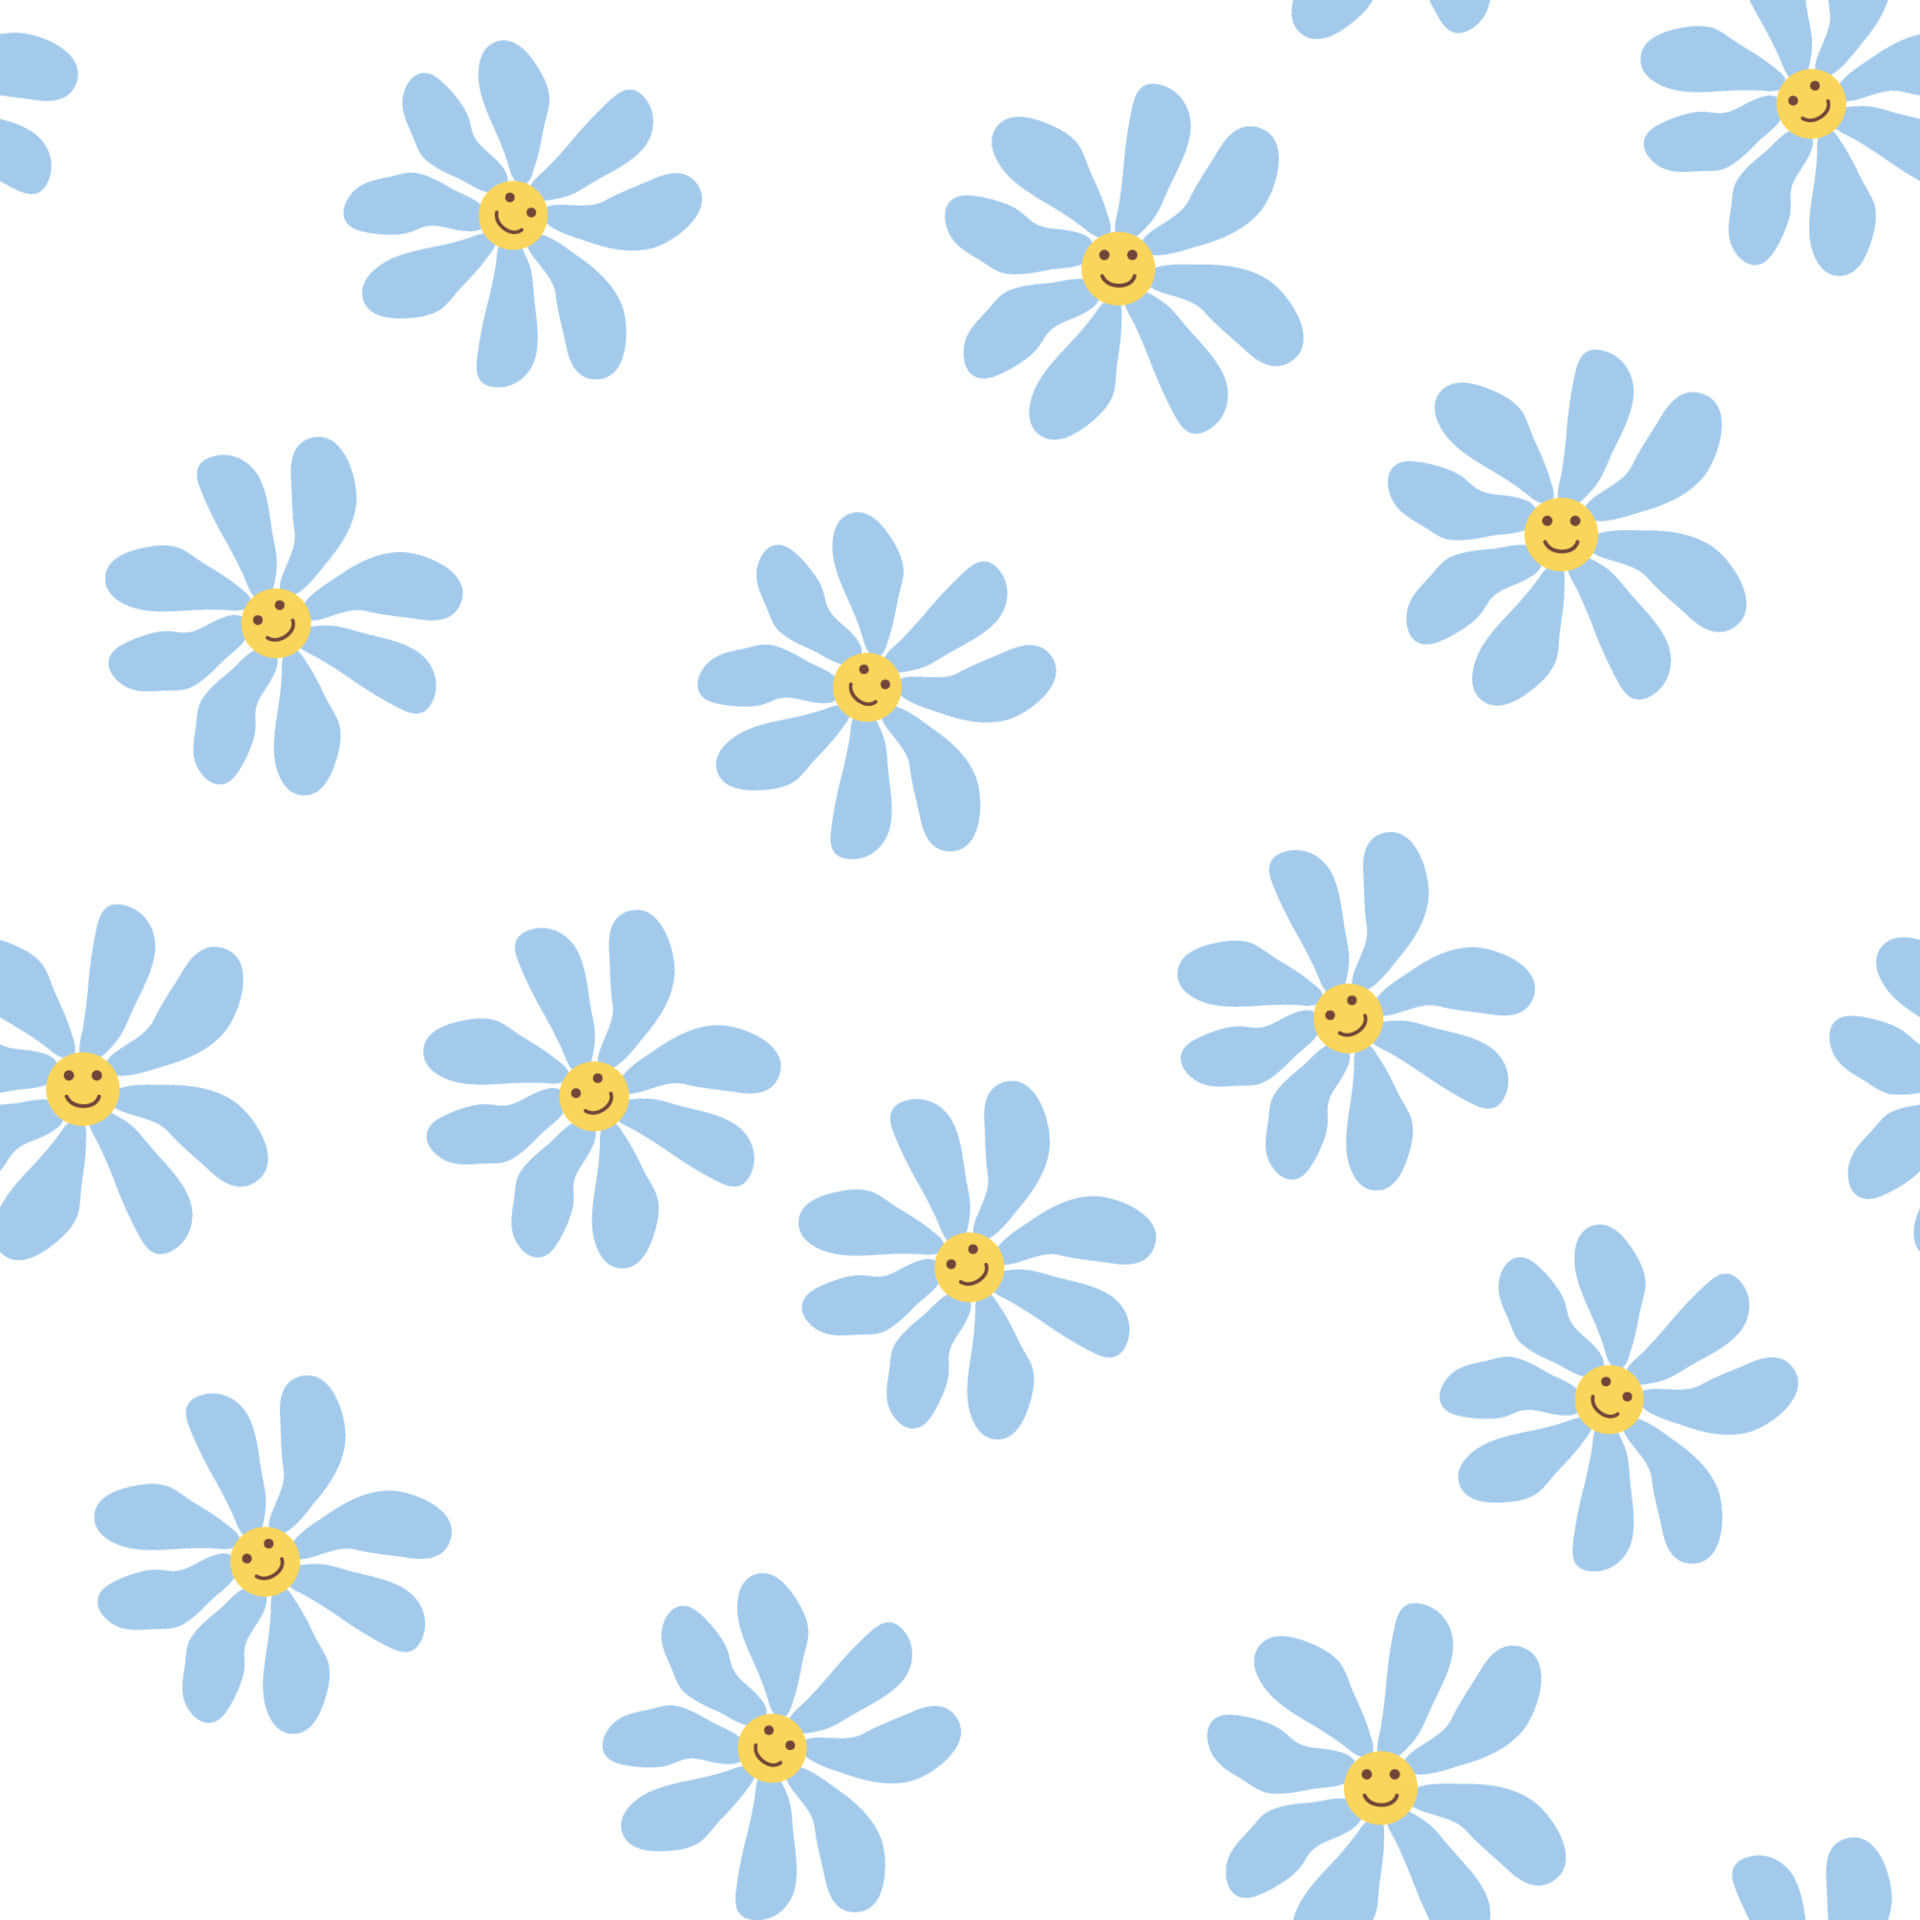 A vibrantly patterned 70s inspired floral. Wallpaper